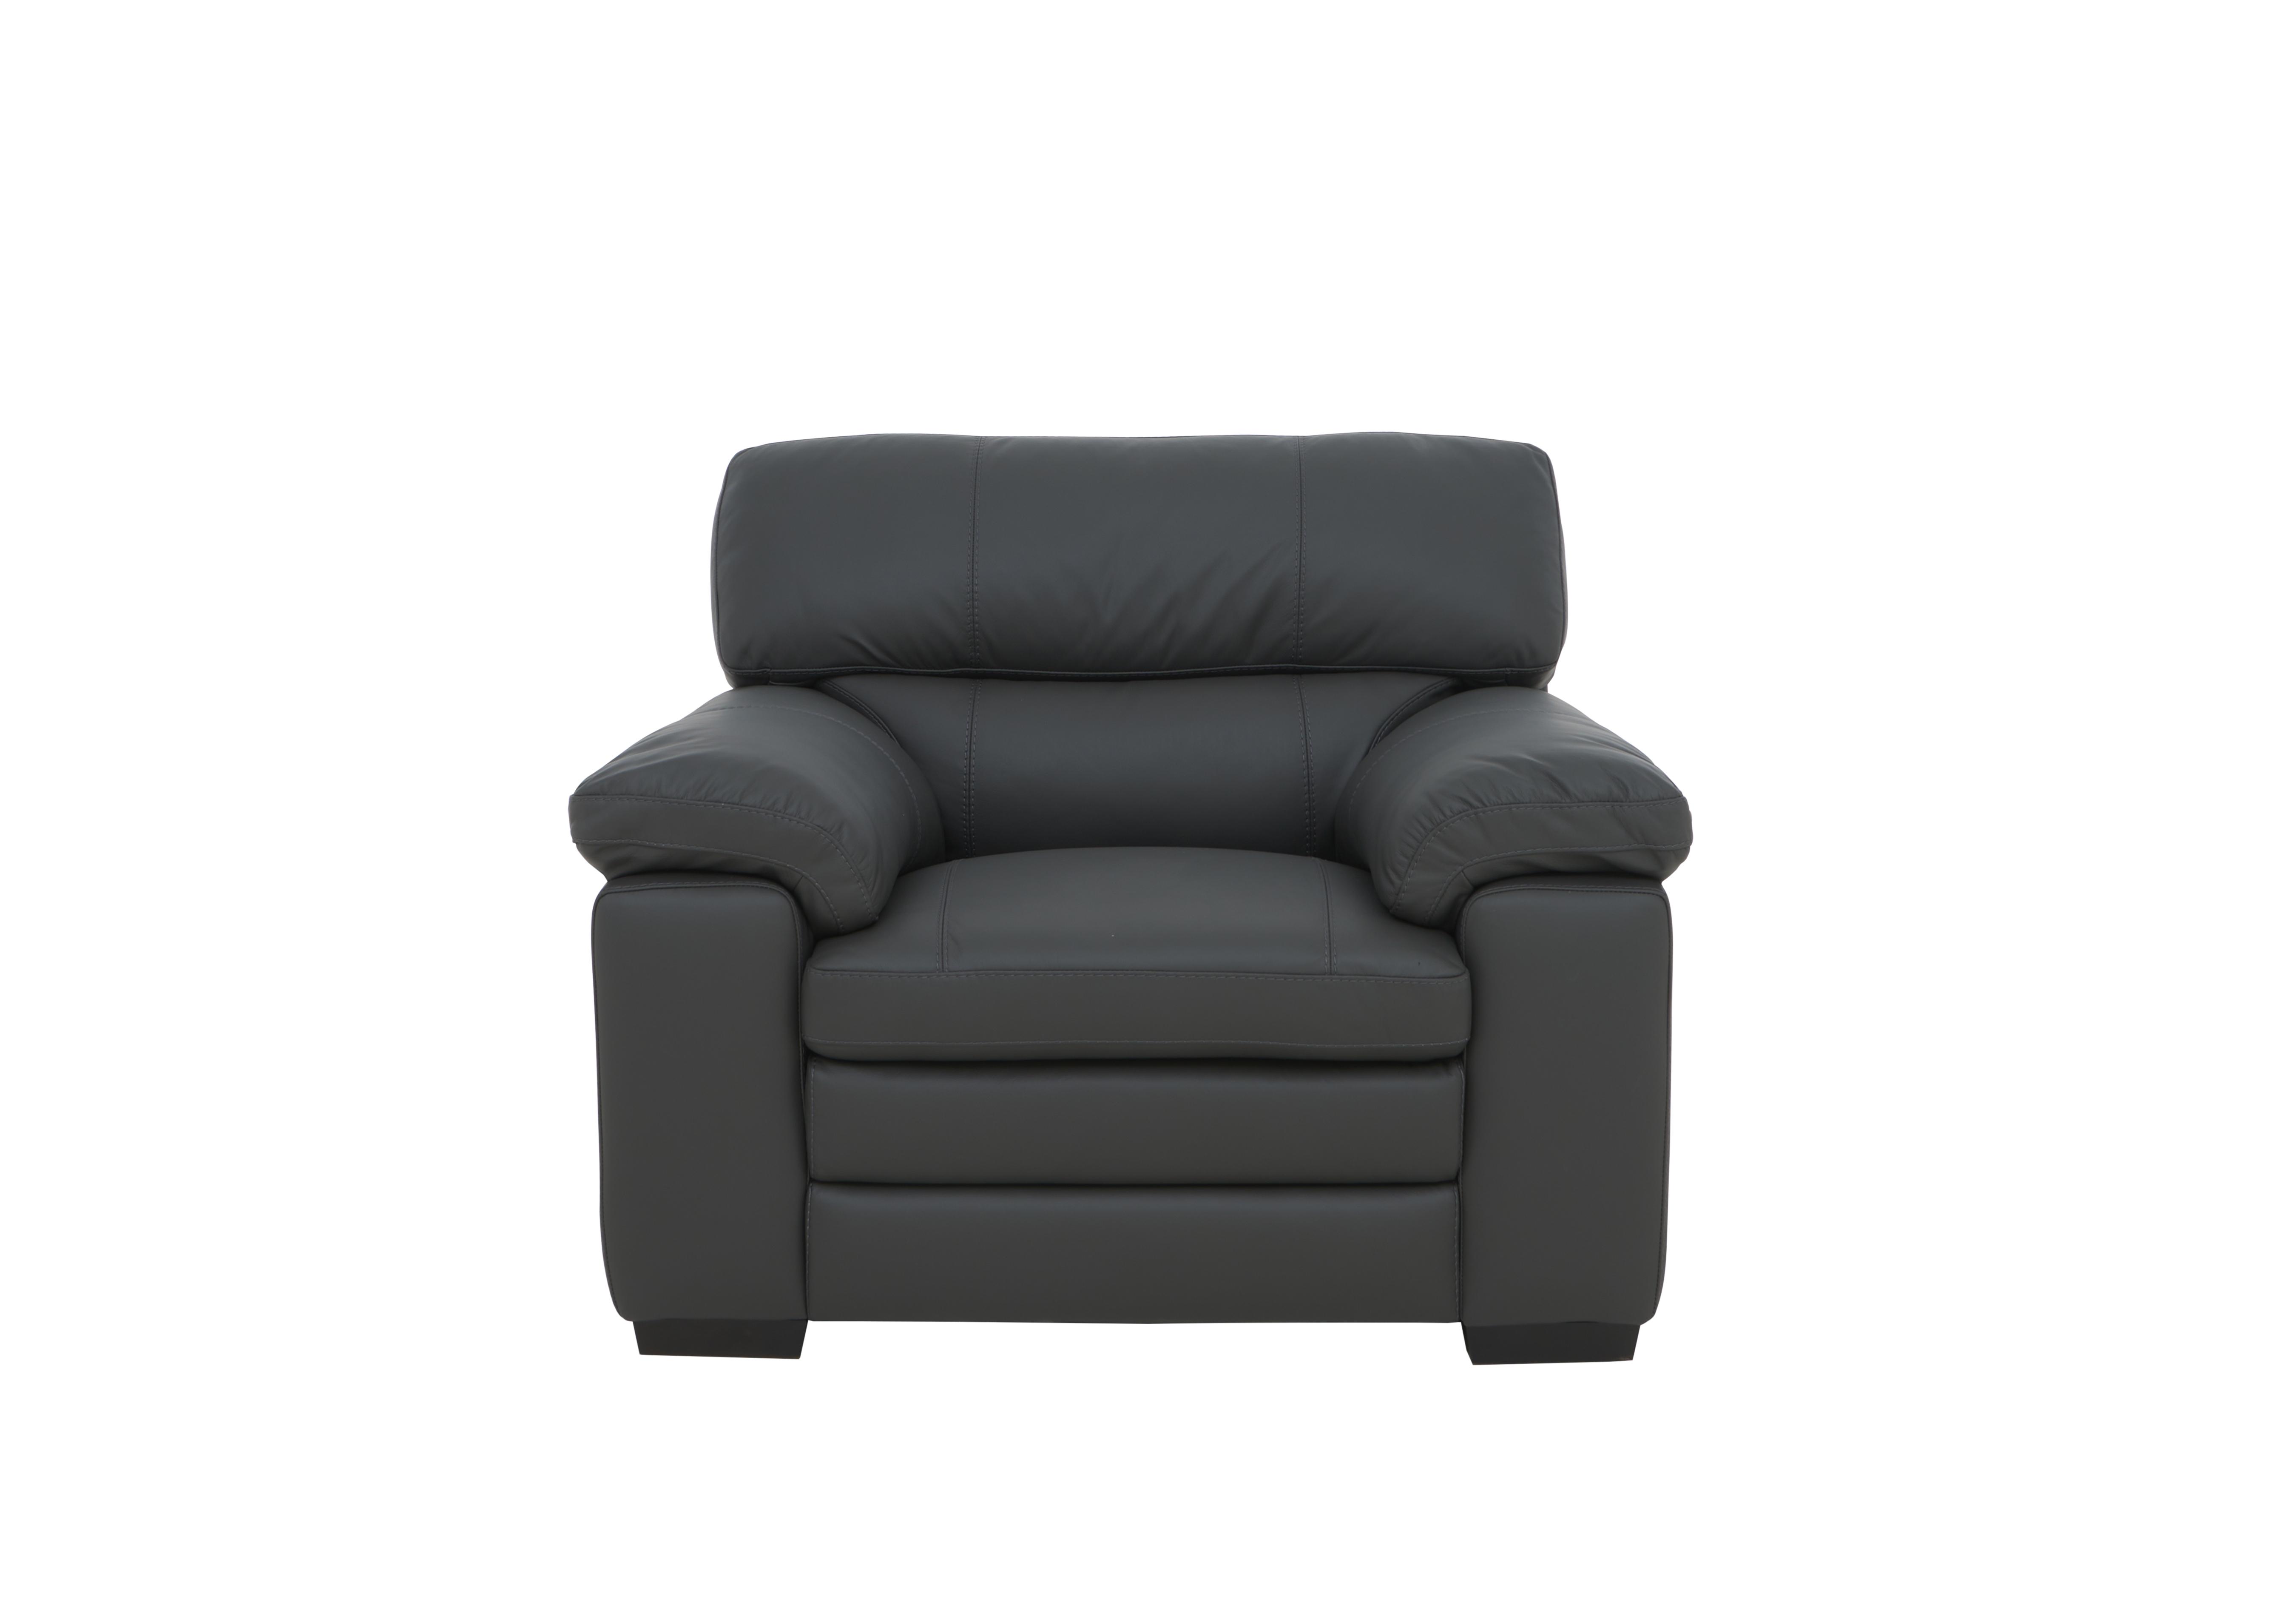 Cozee Leather Armchair in Nw-517e Shale Grey on Furniture Village